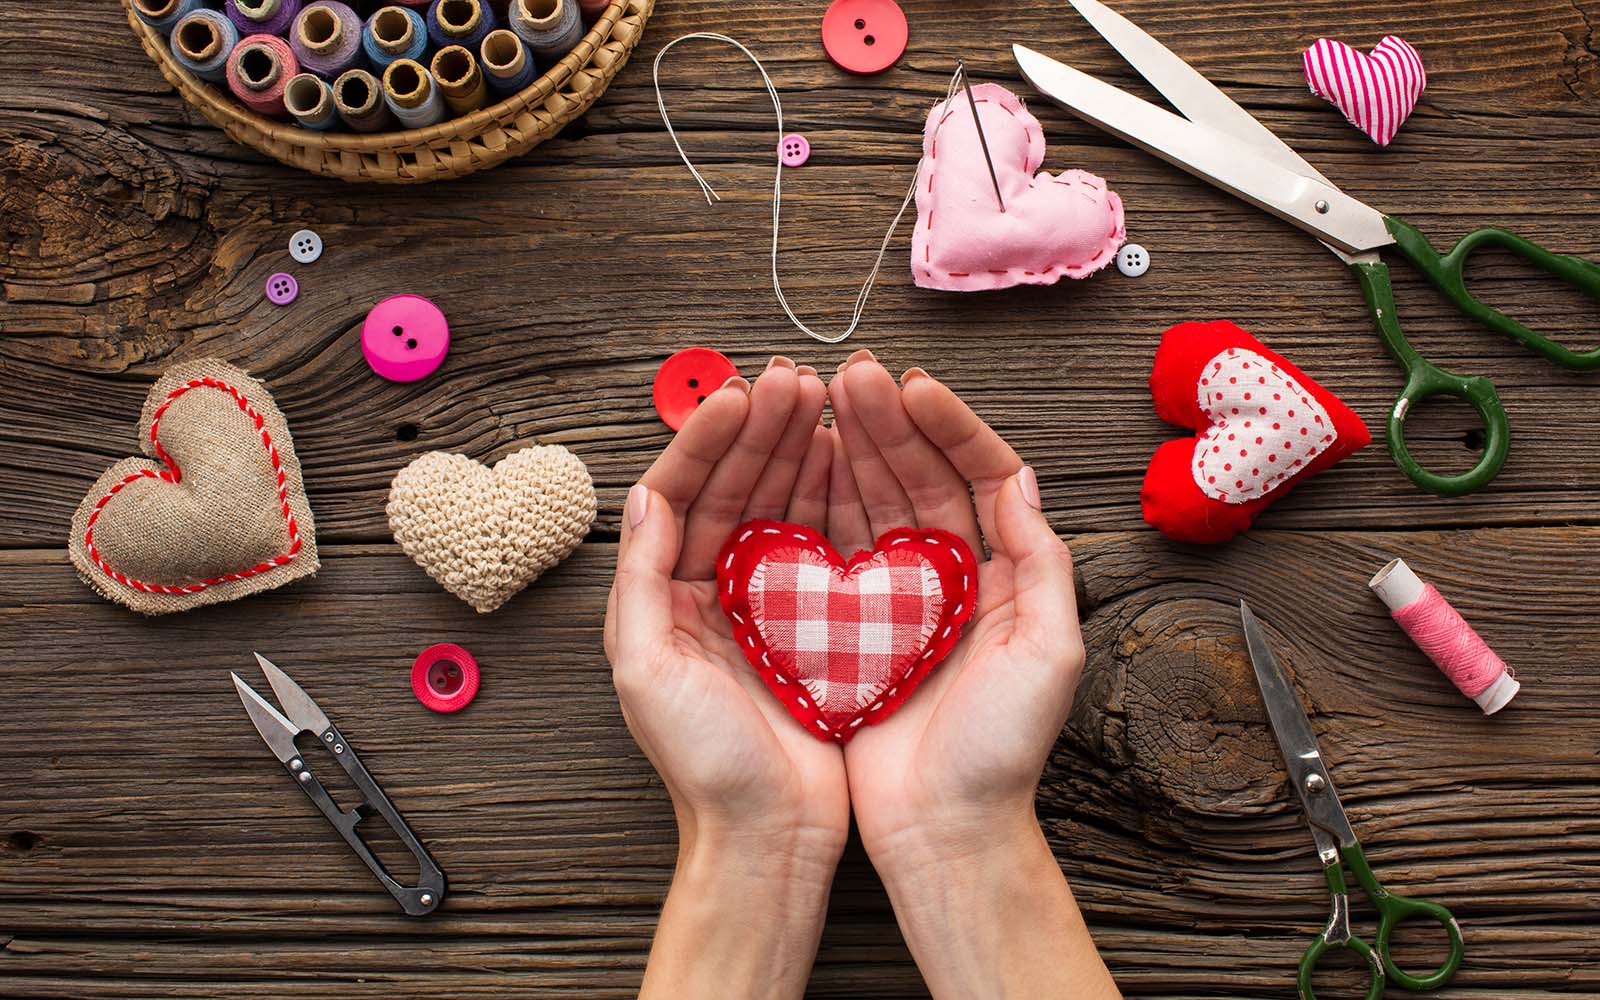 Patchwork red heart held in hands on wooden background